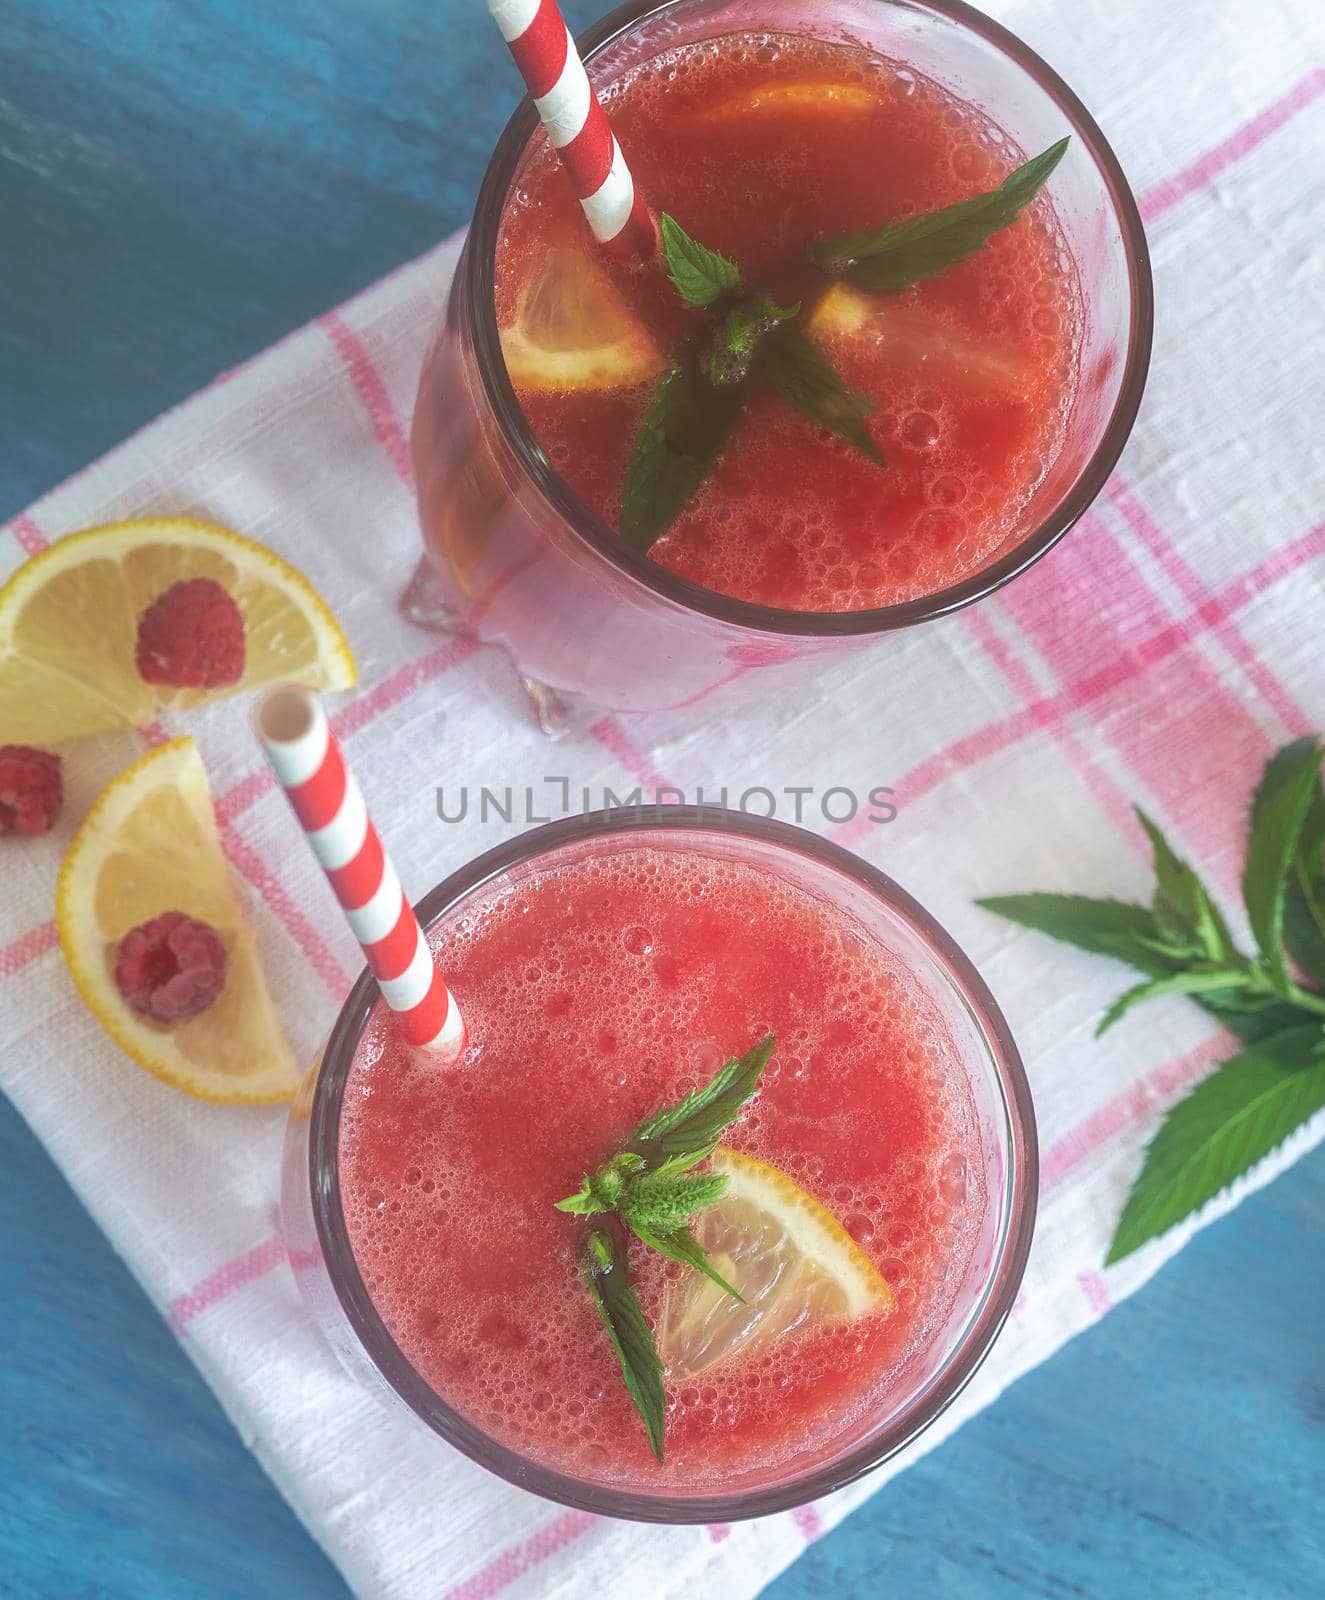 Watermelon juice in a glass with lemon and raspberries. by georgina198